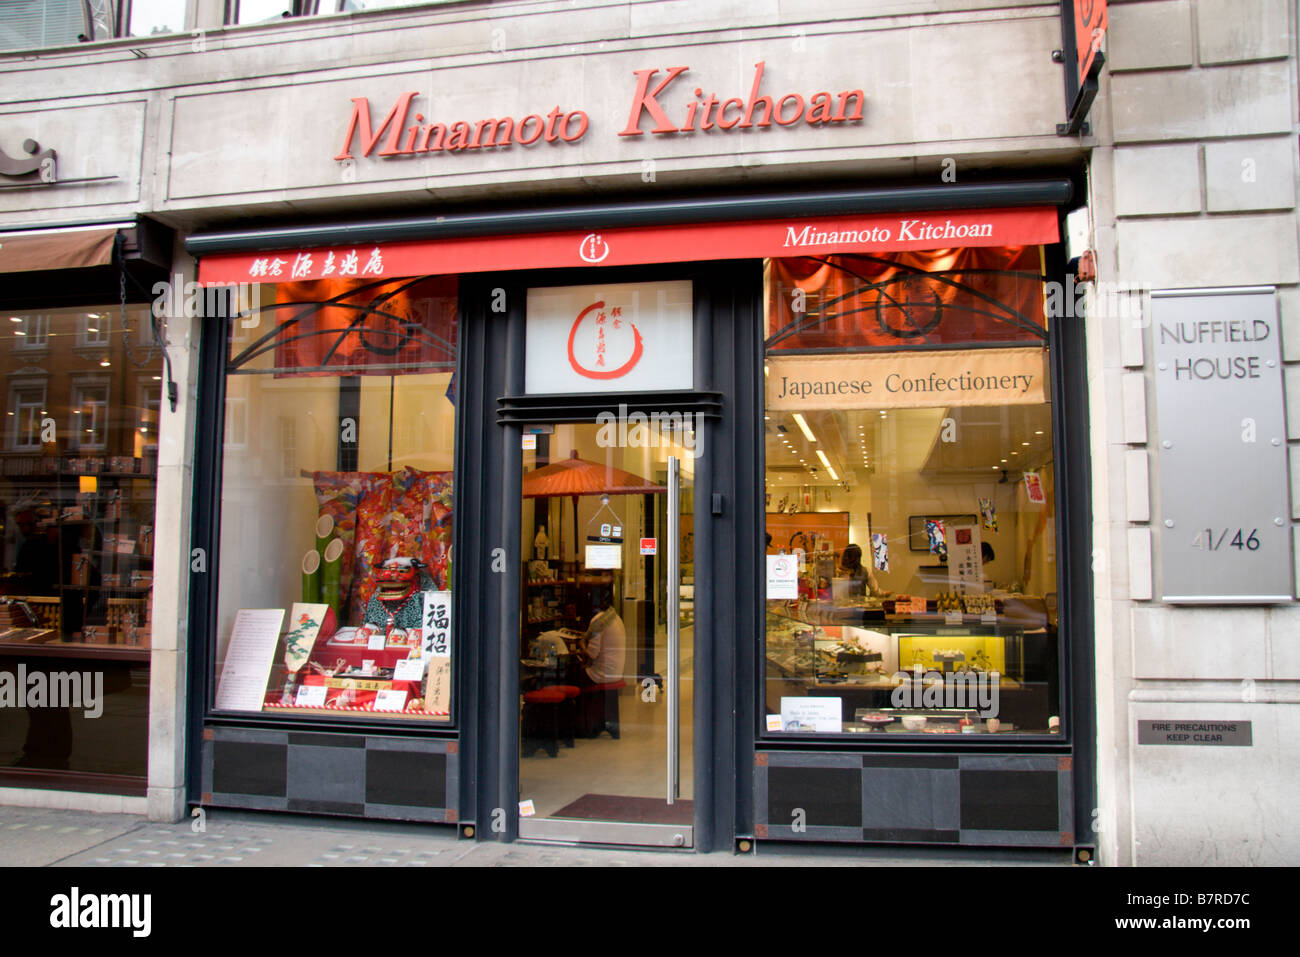 The entrance to the Minamoto Kitchoan shop (Japanese confectionery and health foods) on Piccadilly, London. Jan 2009 Stock Photo